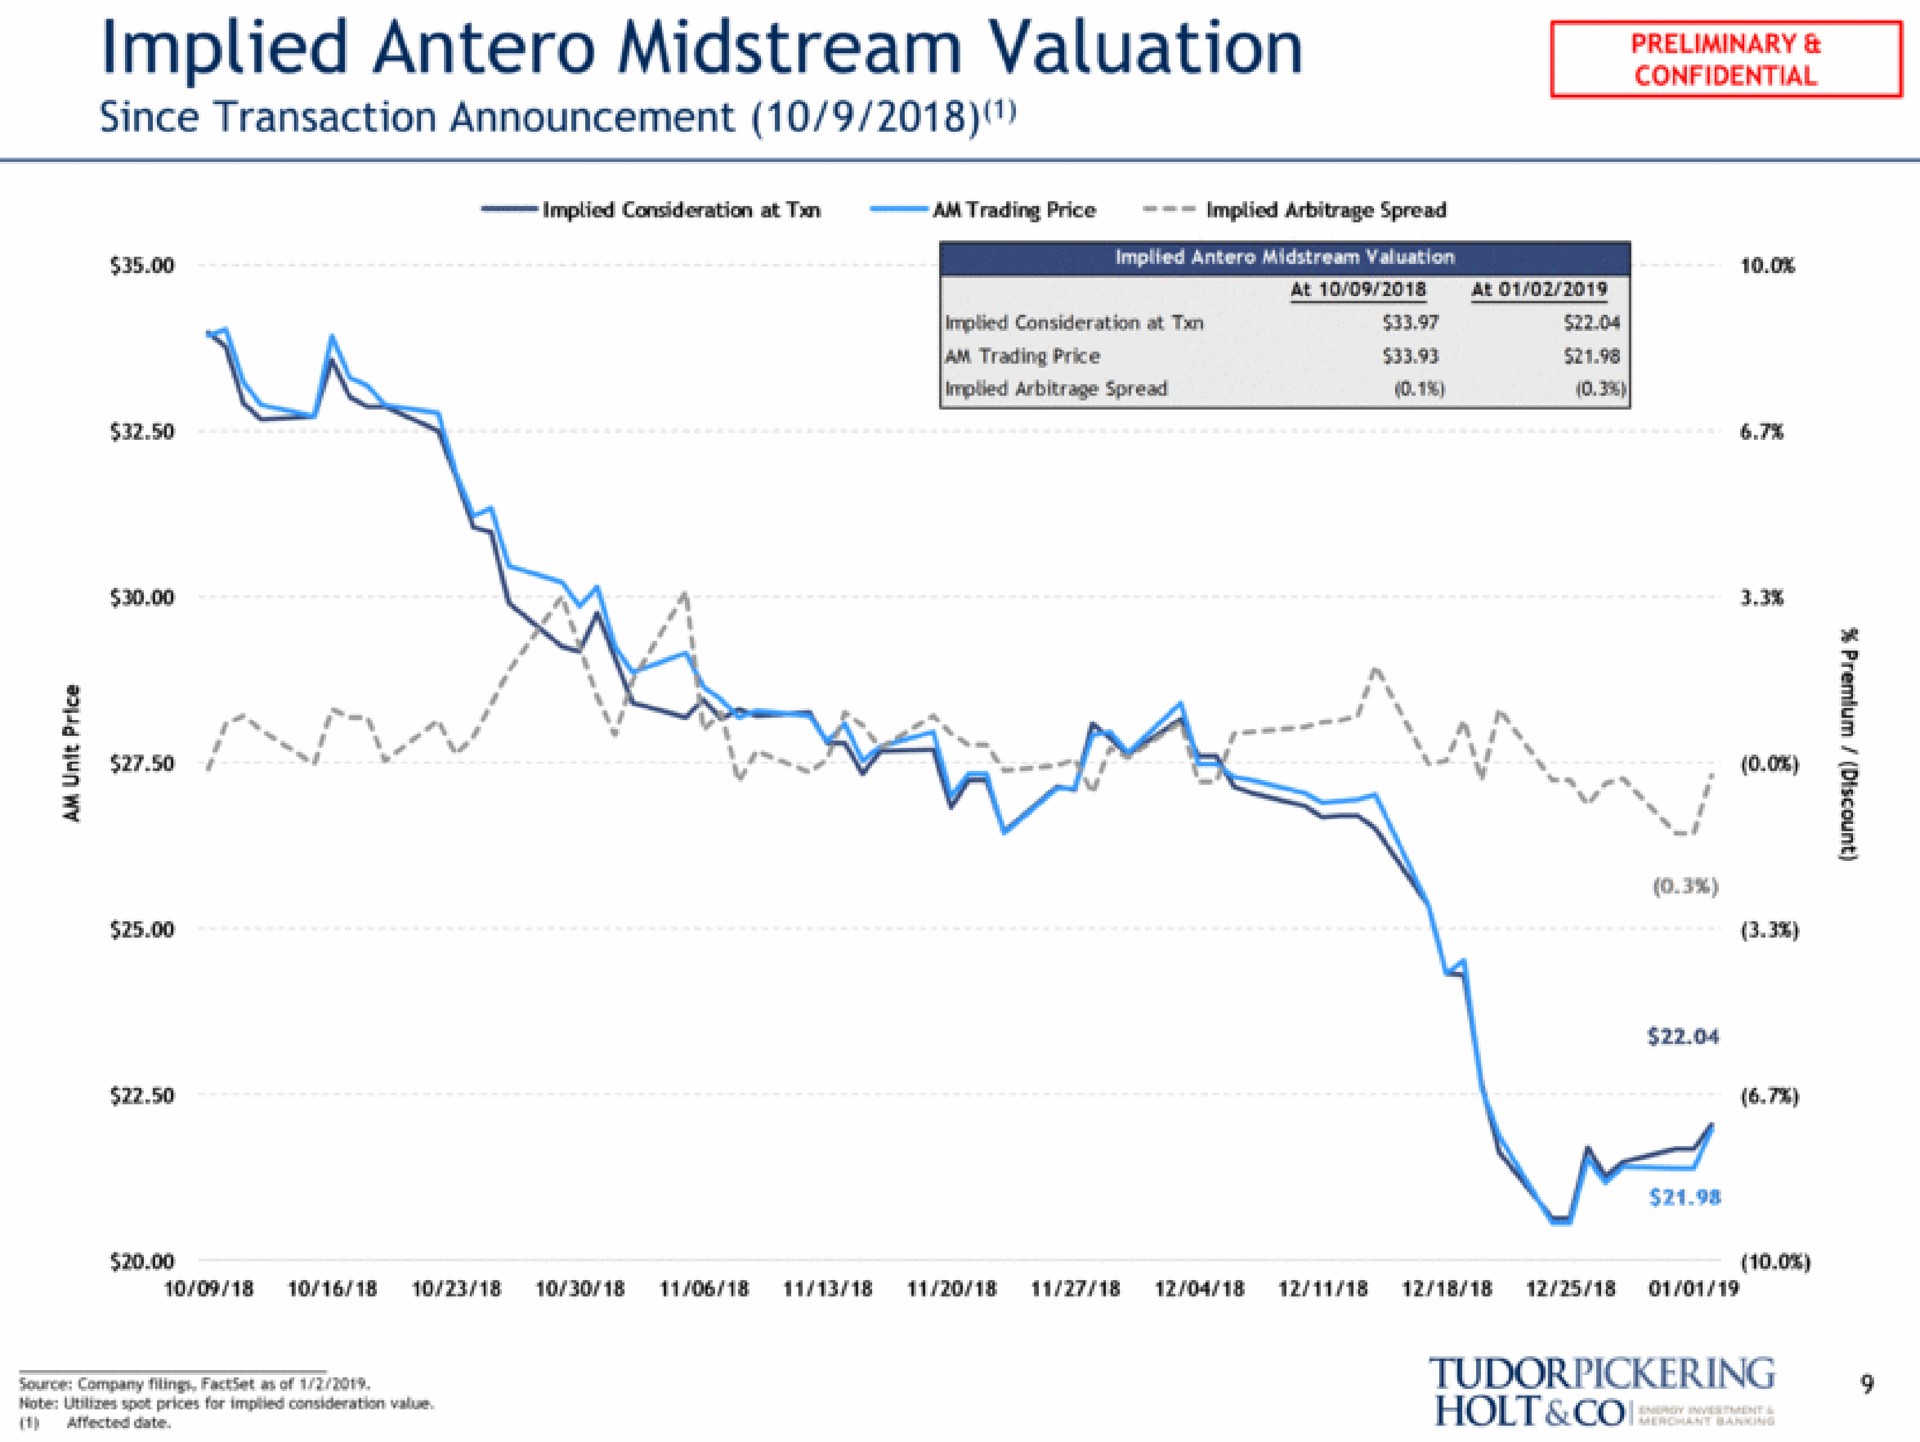 implied midstream valuation since transaction announcement i sauce on | Tudor, Pickering, Holt & Co